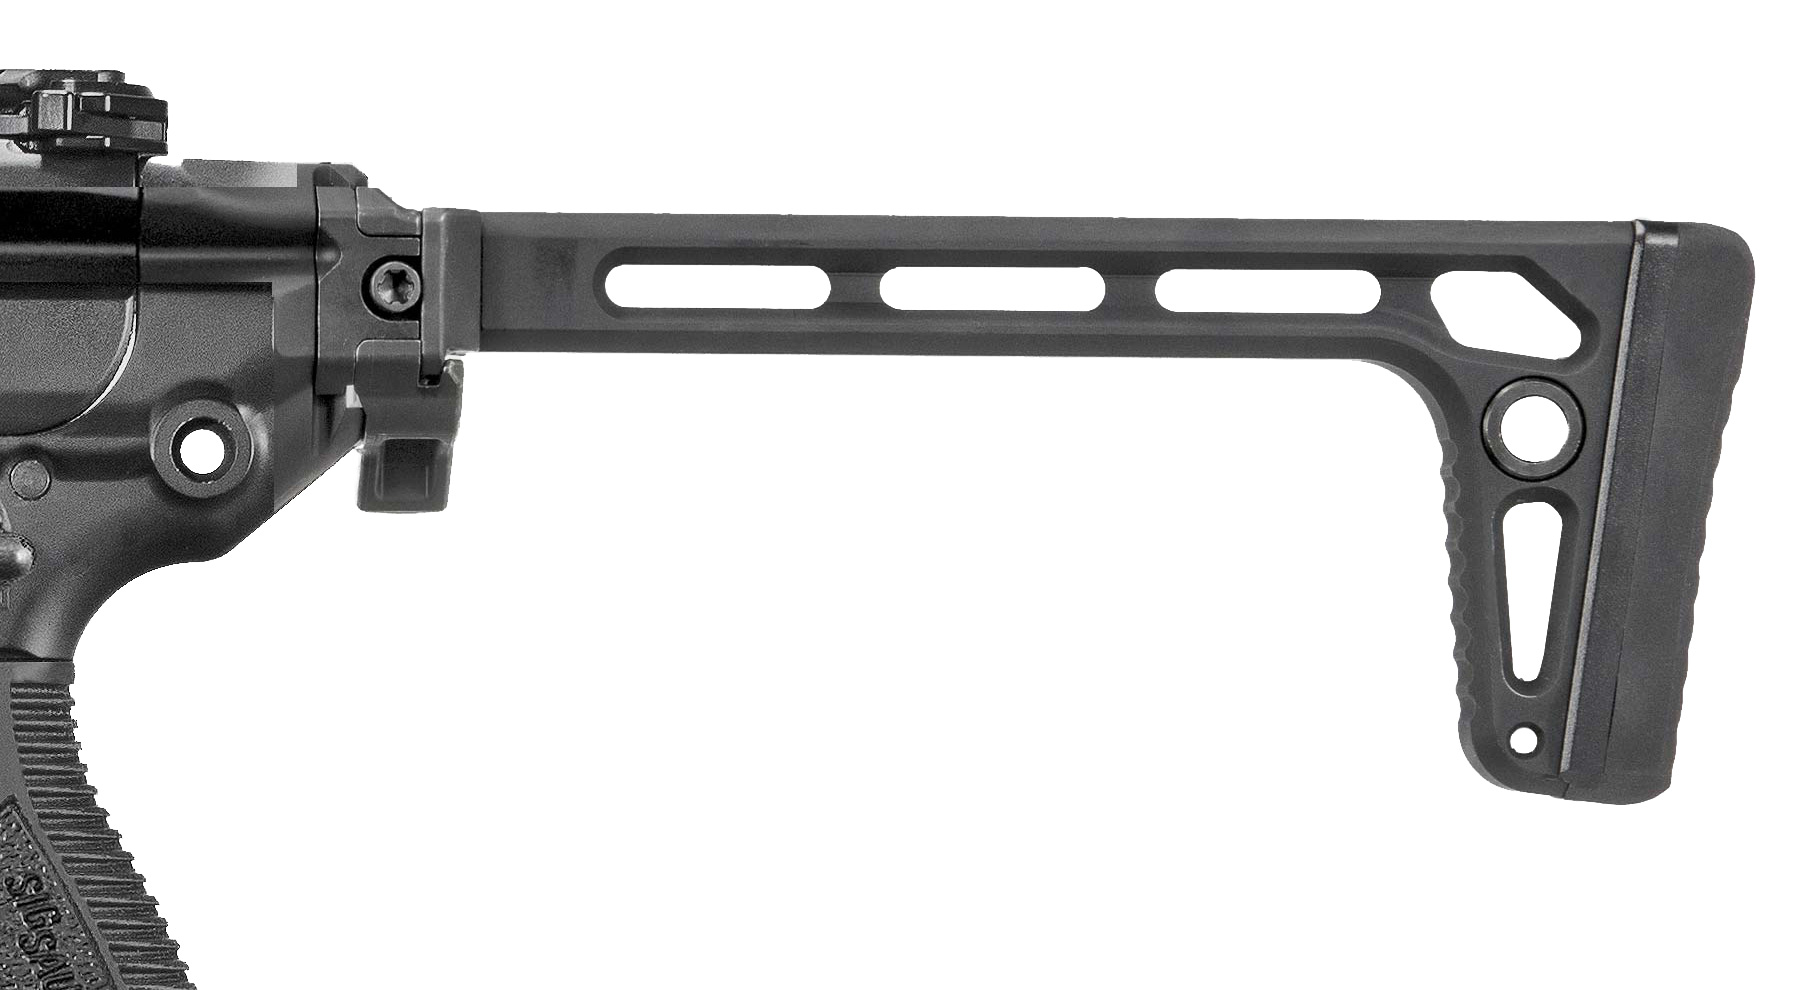 SIG SAUER MCX/MPX Folding Stock | 25% Off 5 Star Rating w/ Free S&H